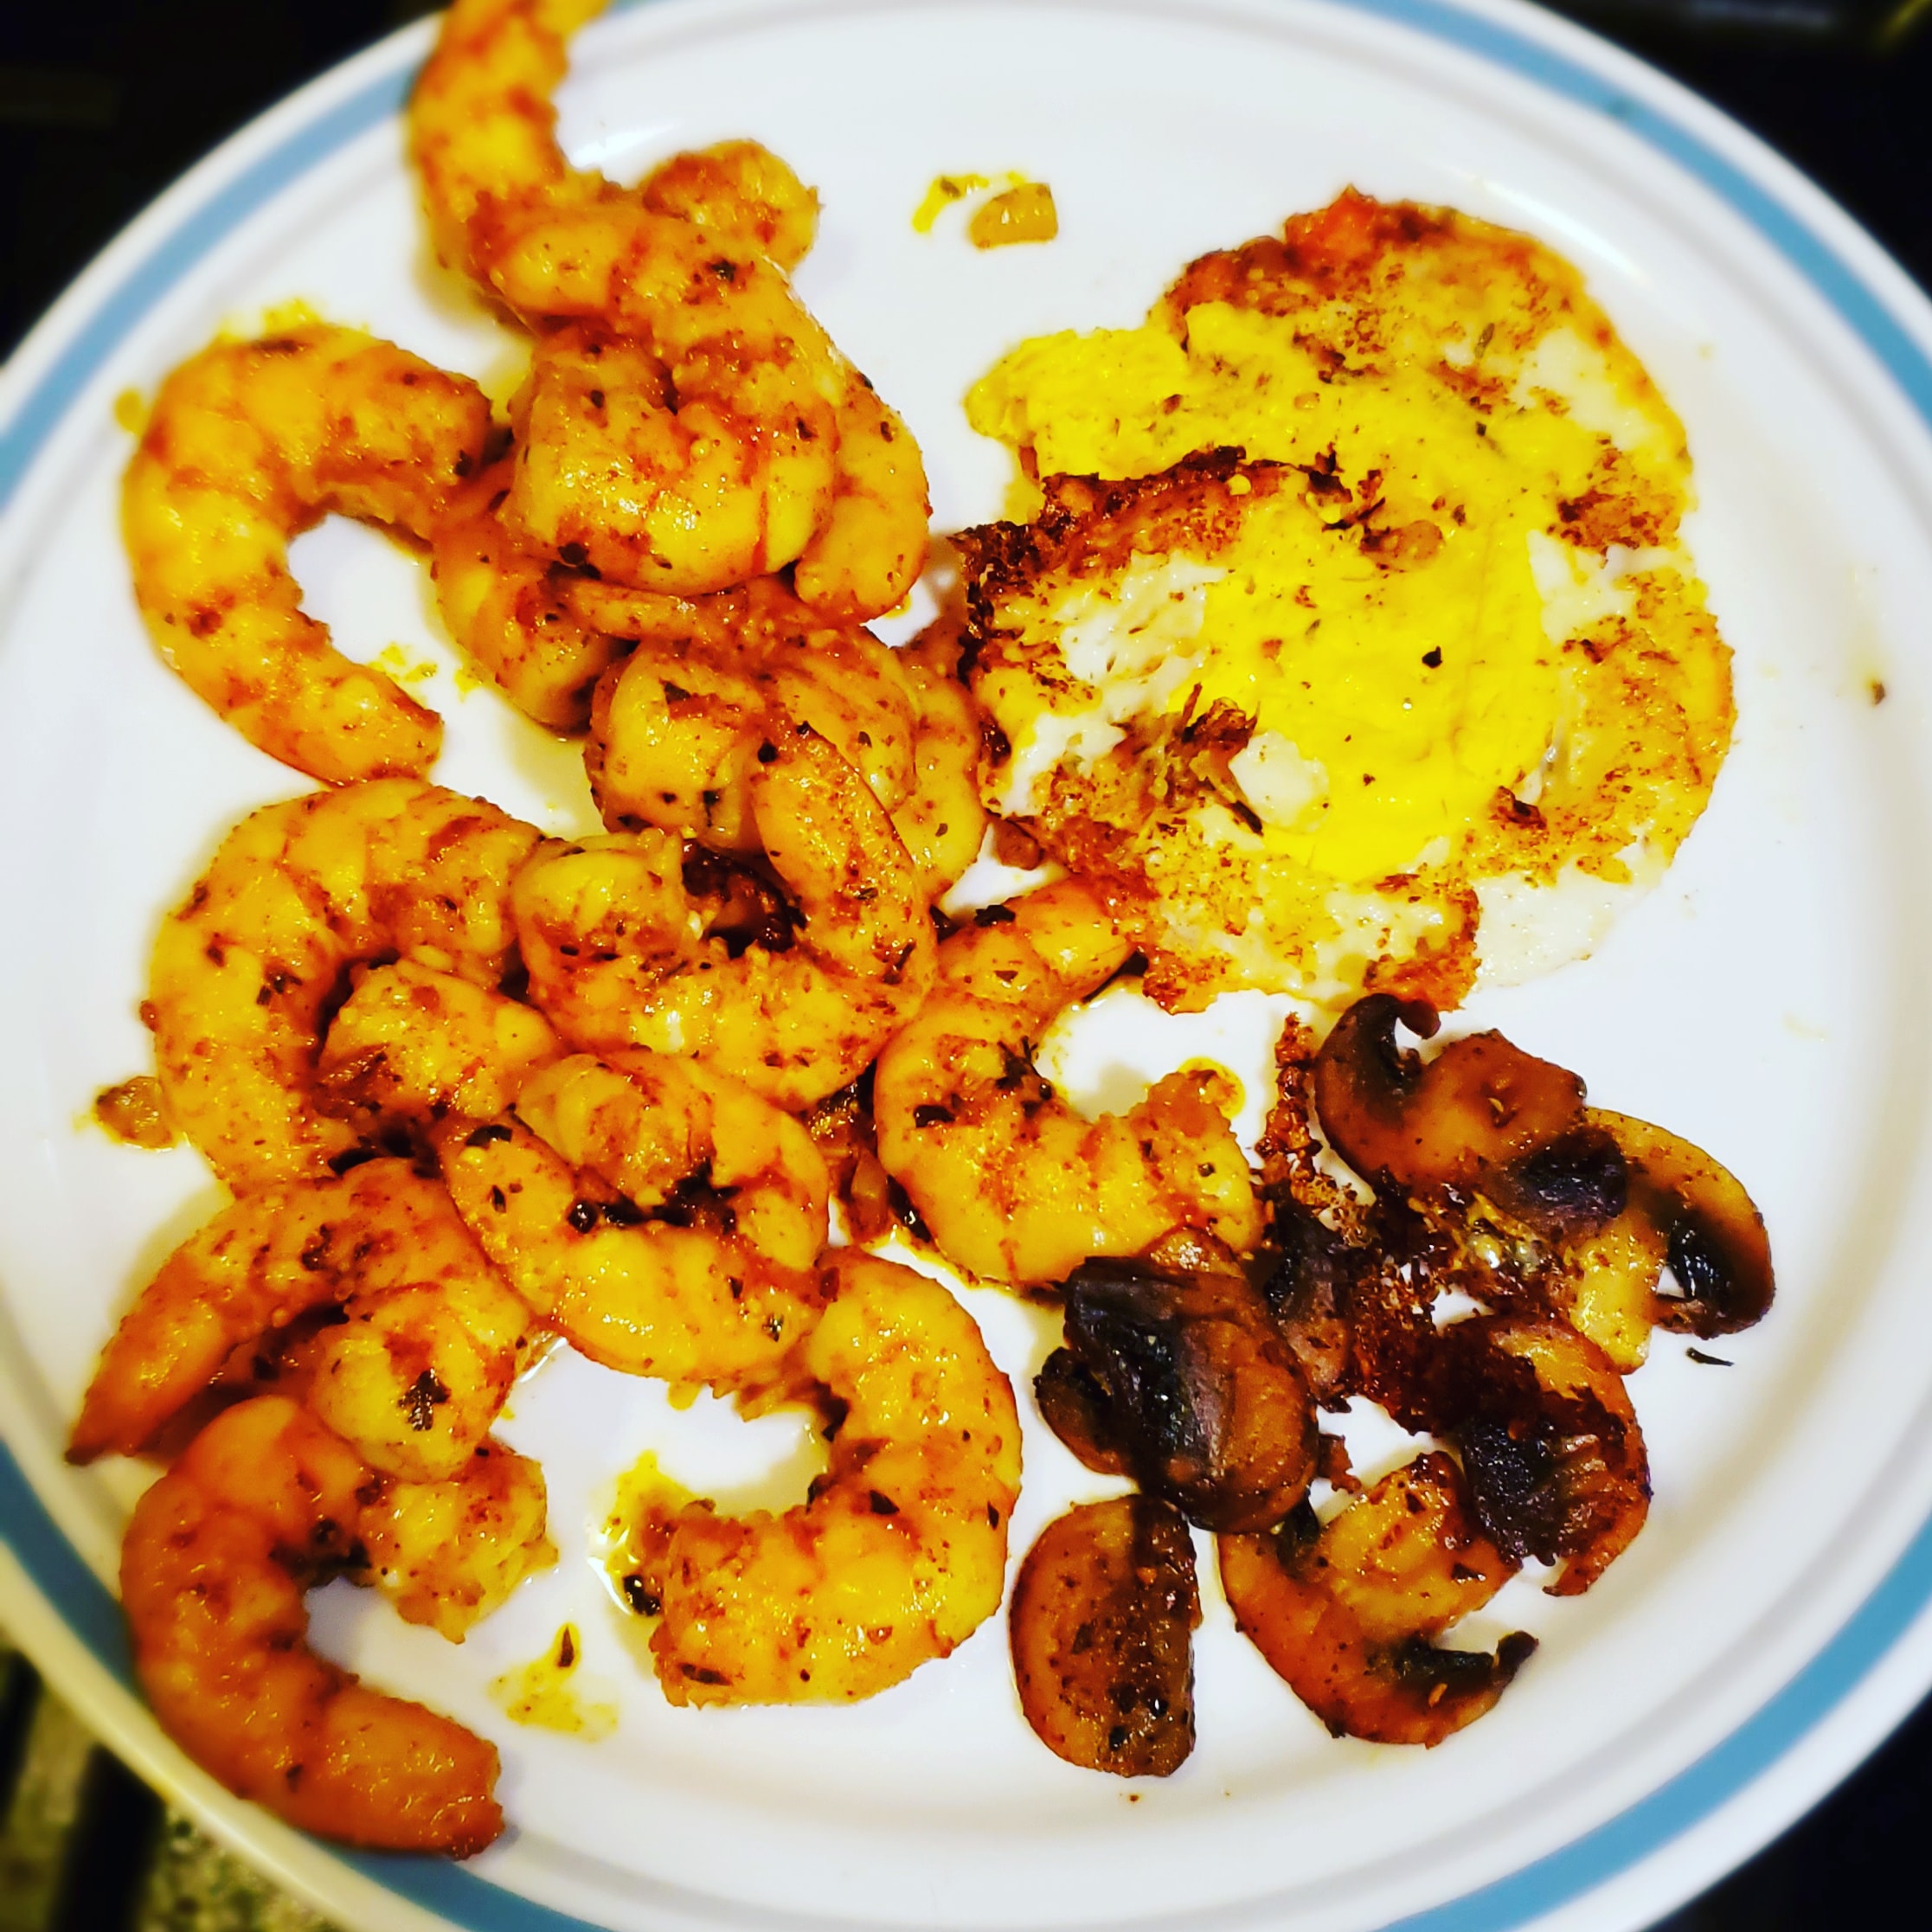 Fresh shrimp and a fresh egg , some mushrooms and we’ll call it a keto meal.